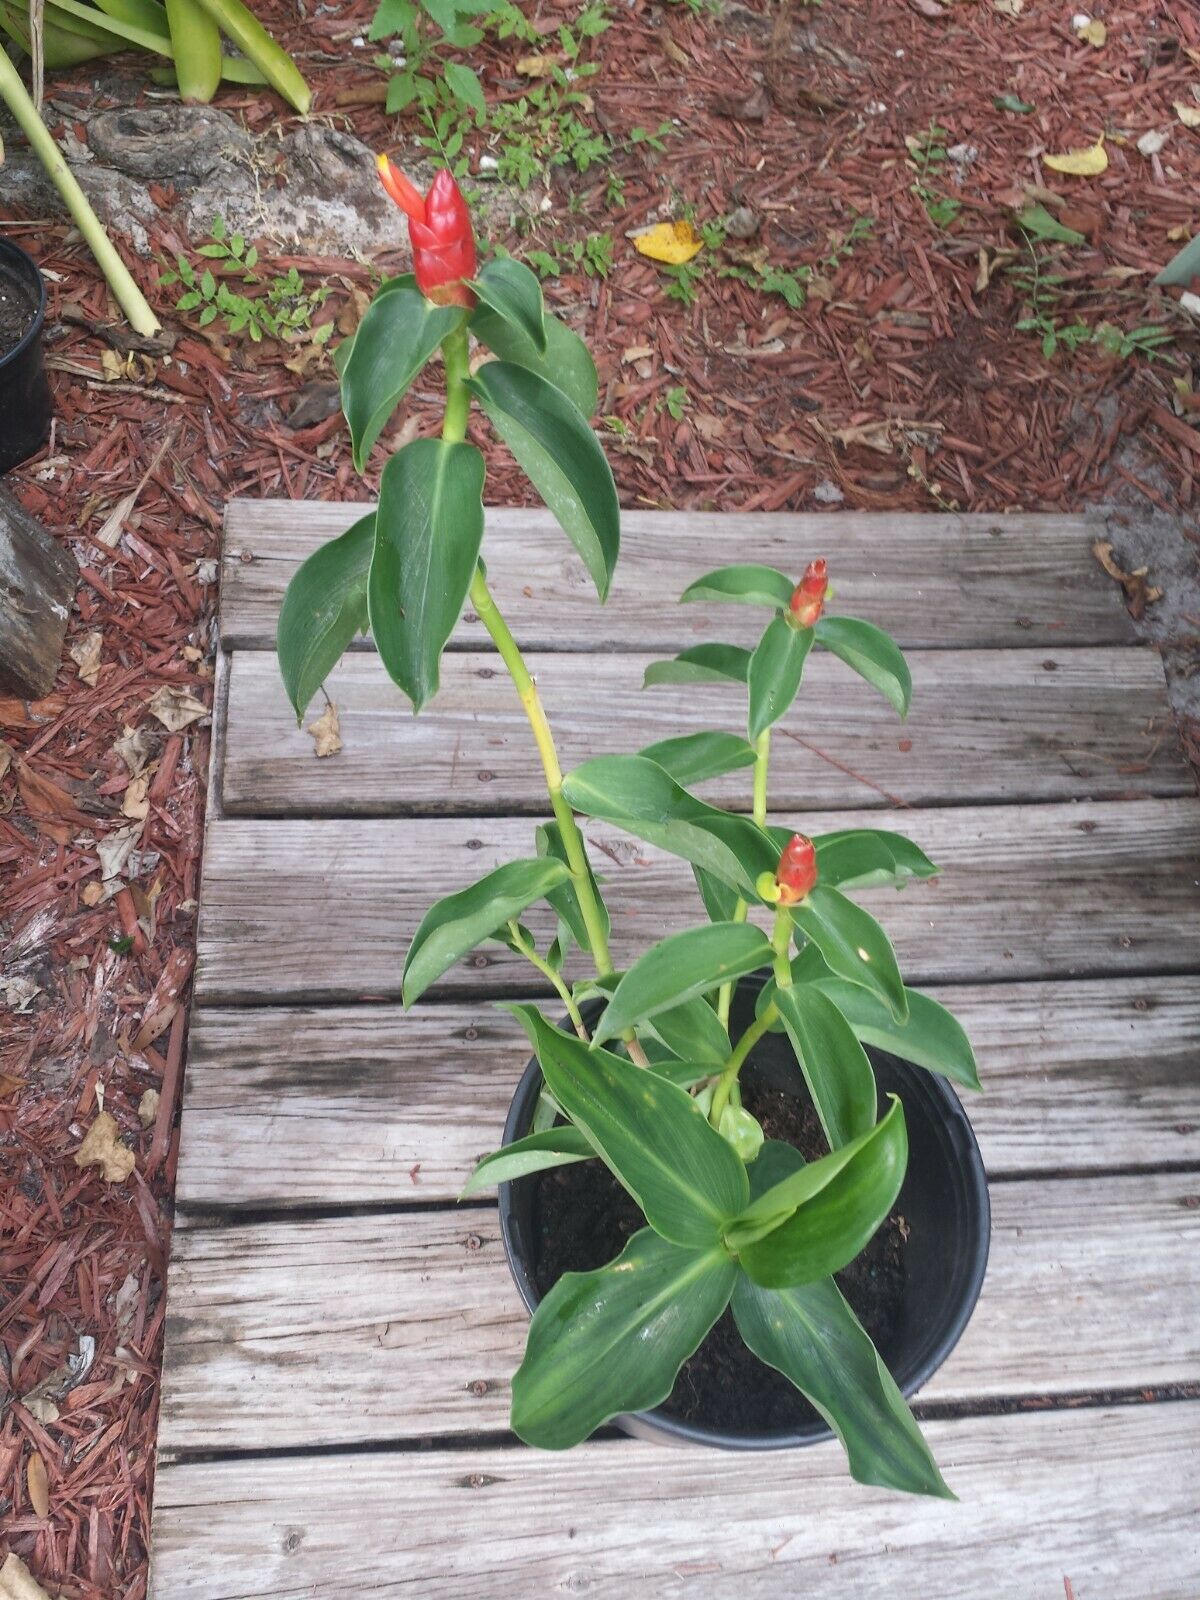 Red Top Ginger Tropical Plant not Rhizome